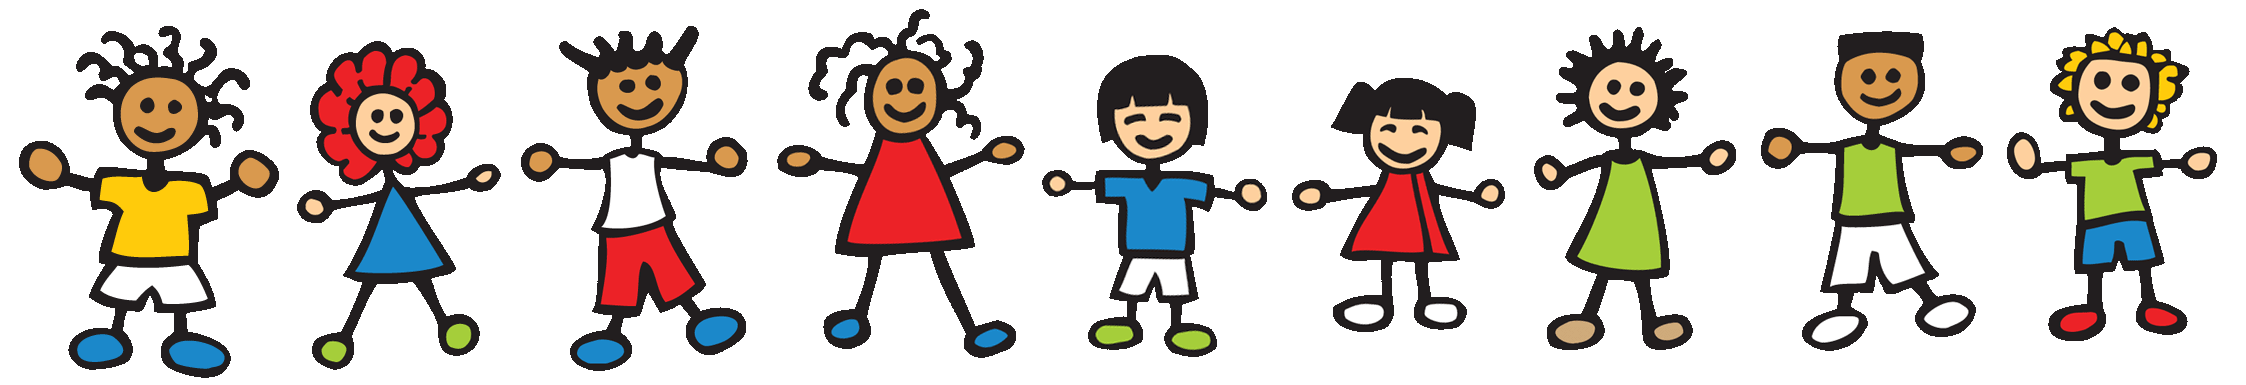 Children Playing Cartoon Images